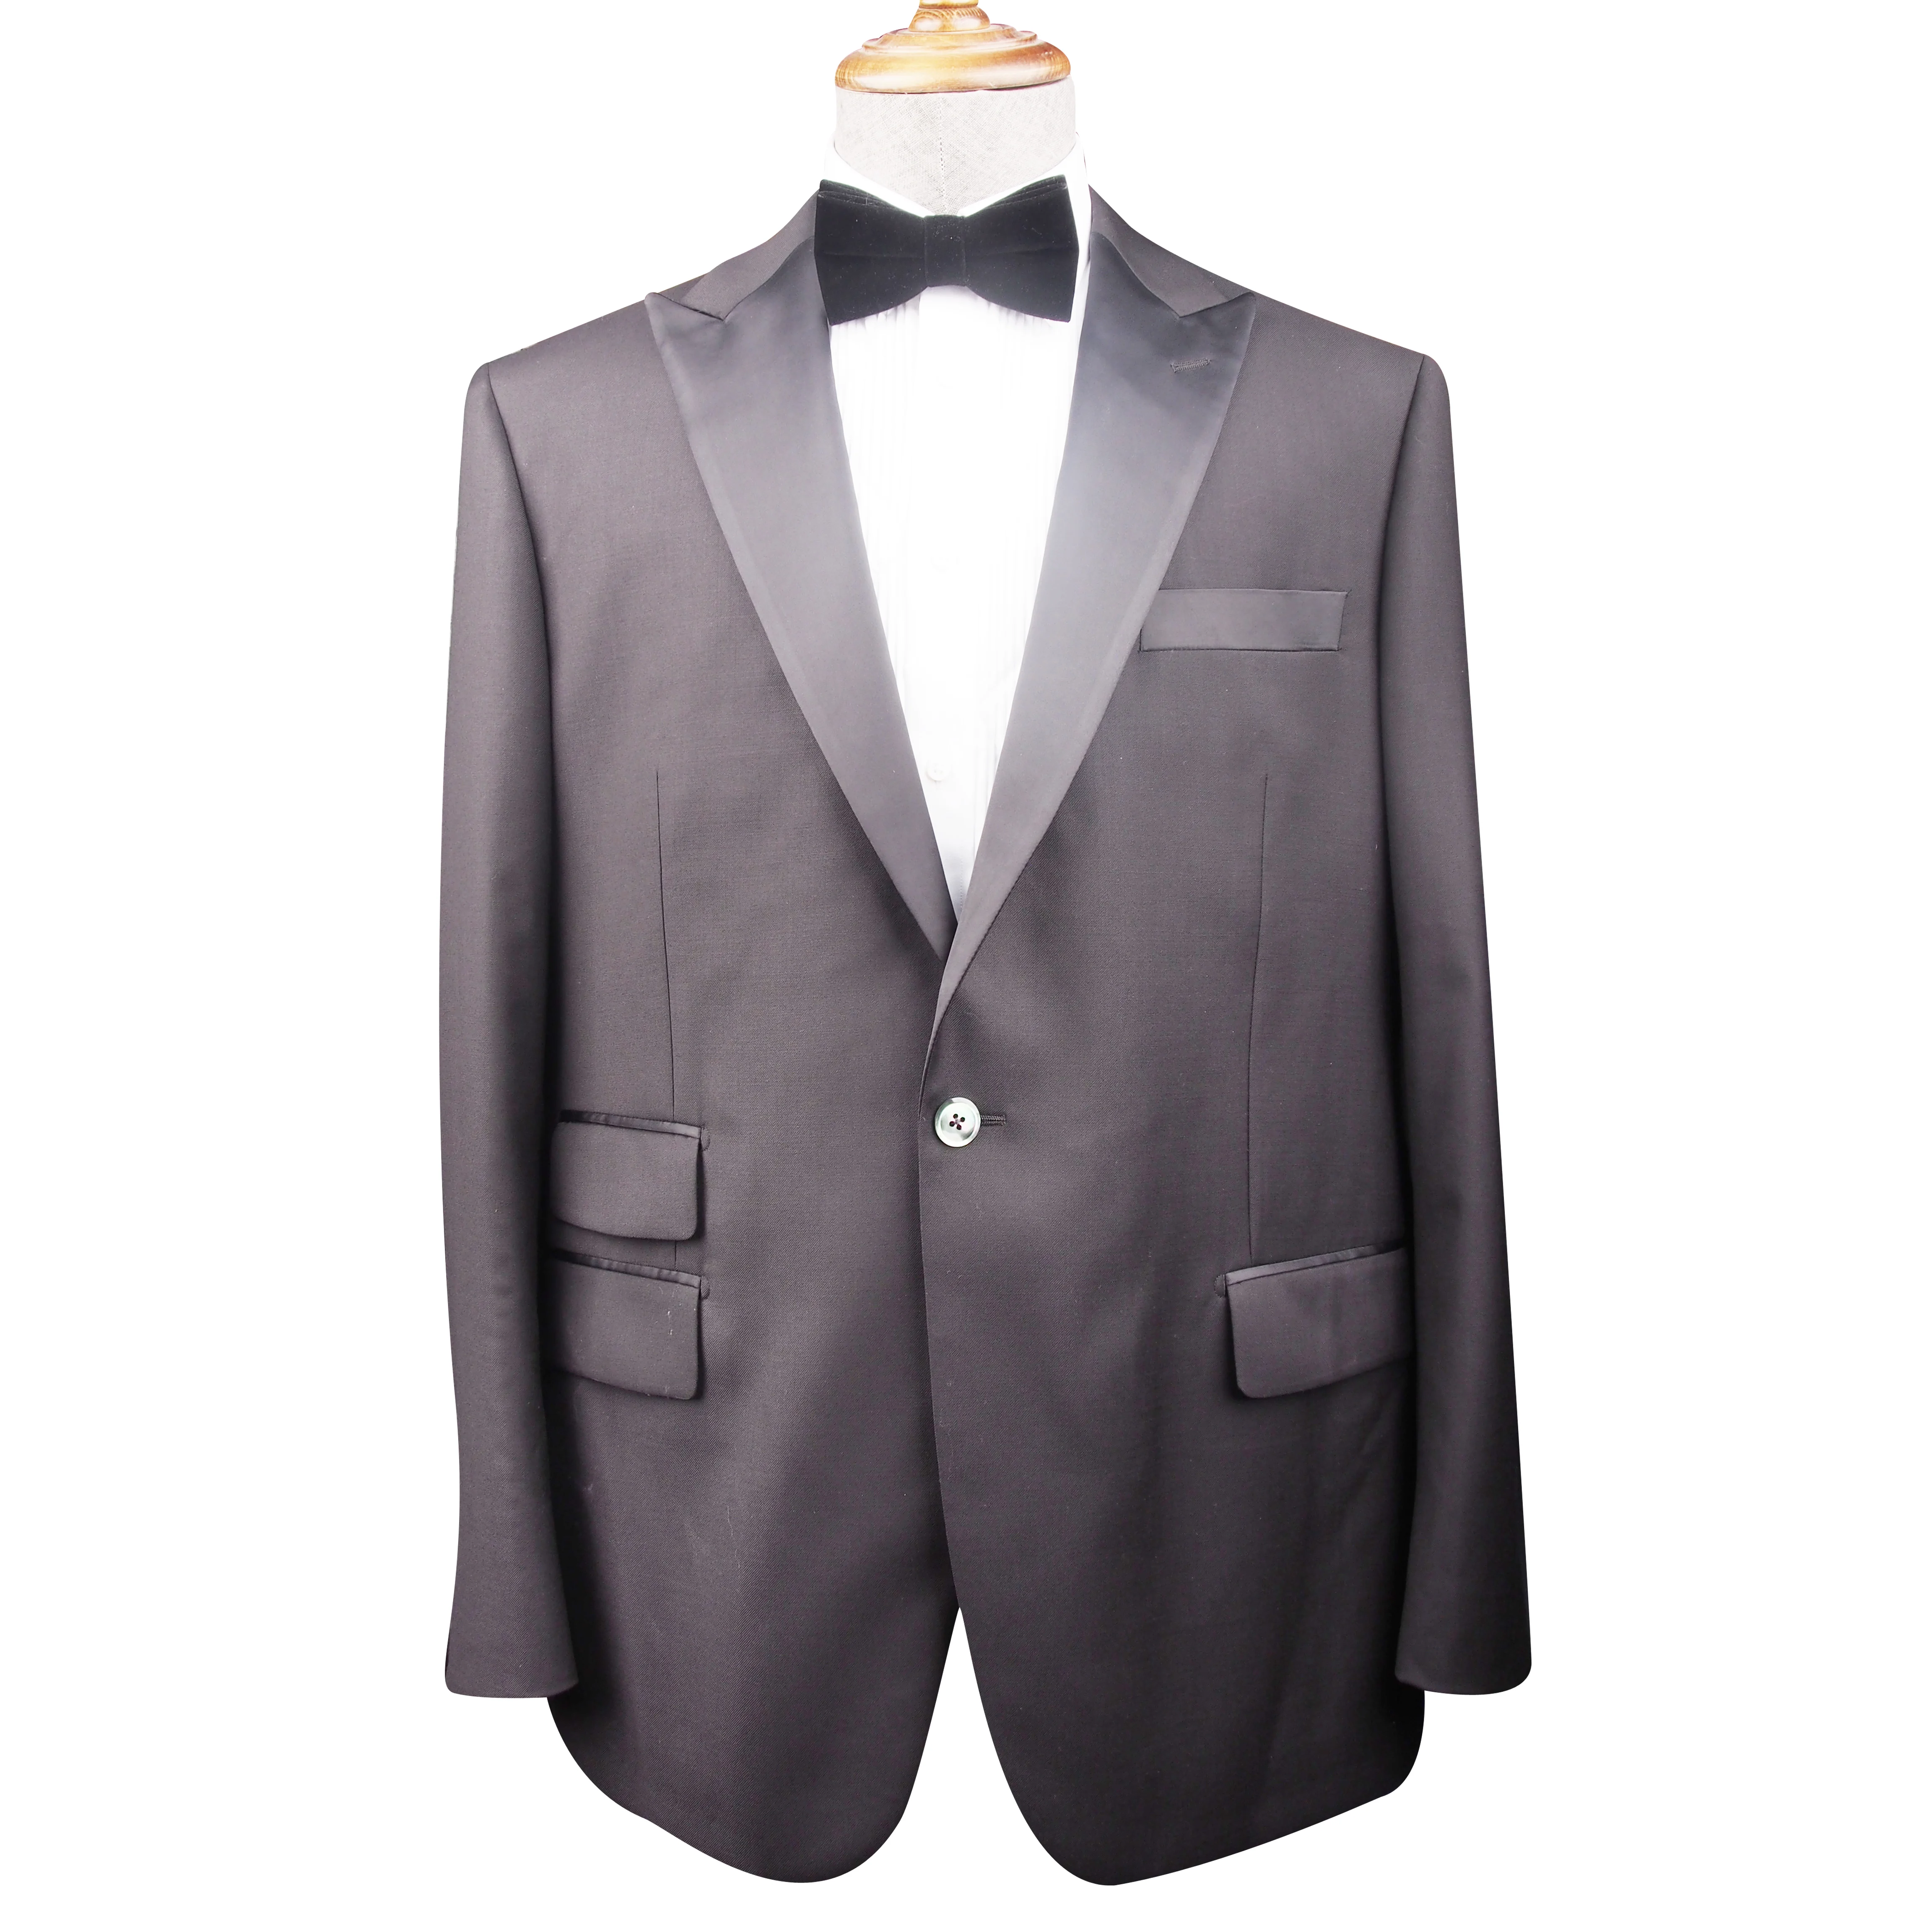 made in China wholesale 2 قِطَع 100% Wool  Tuxedo Suit modern men’s suit